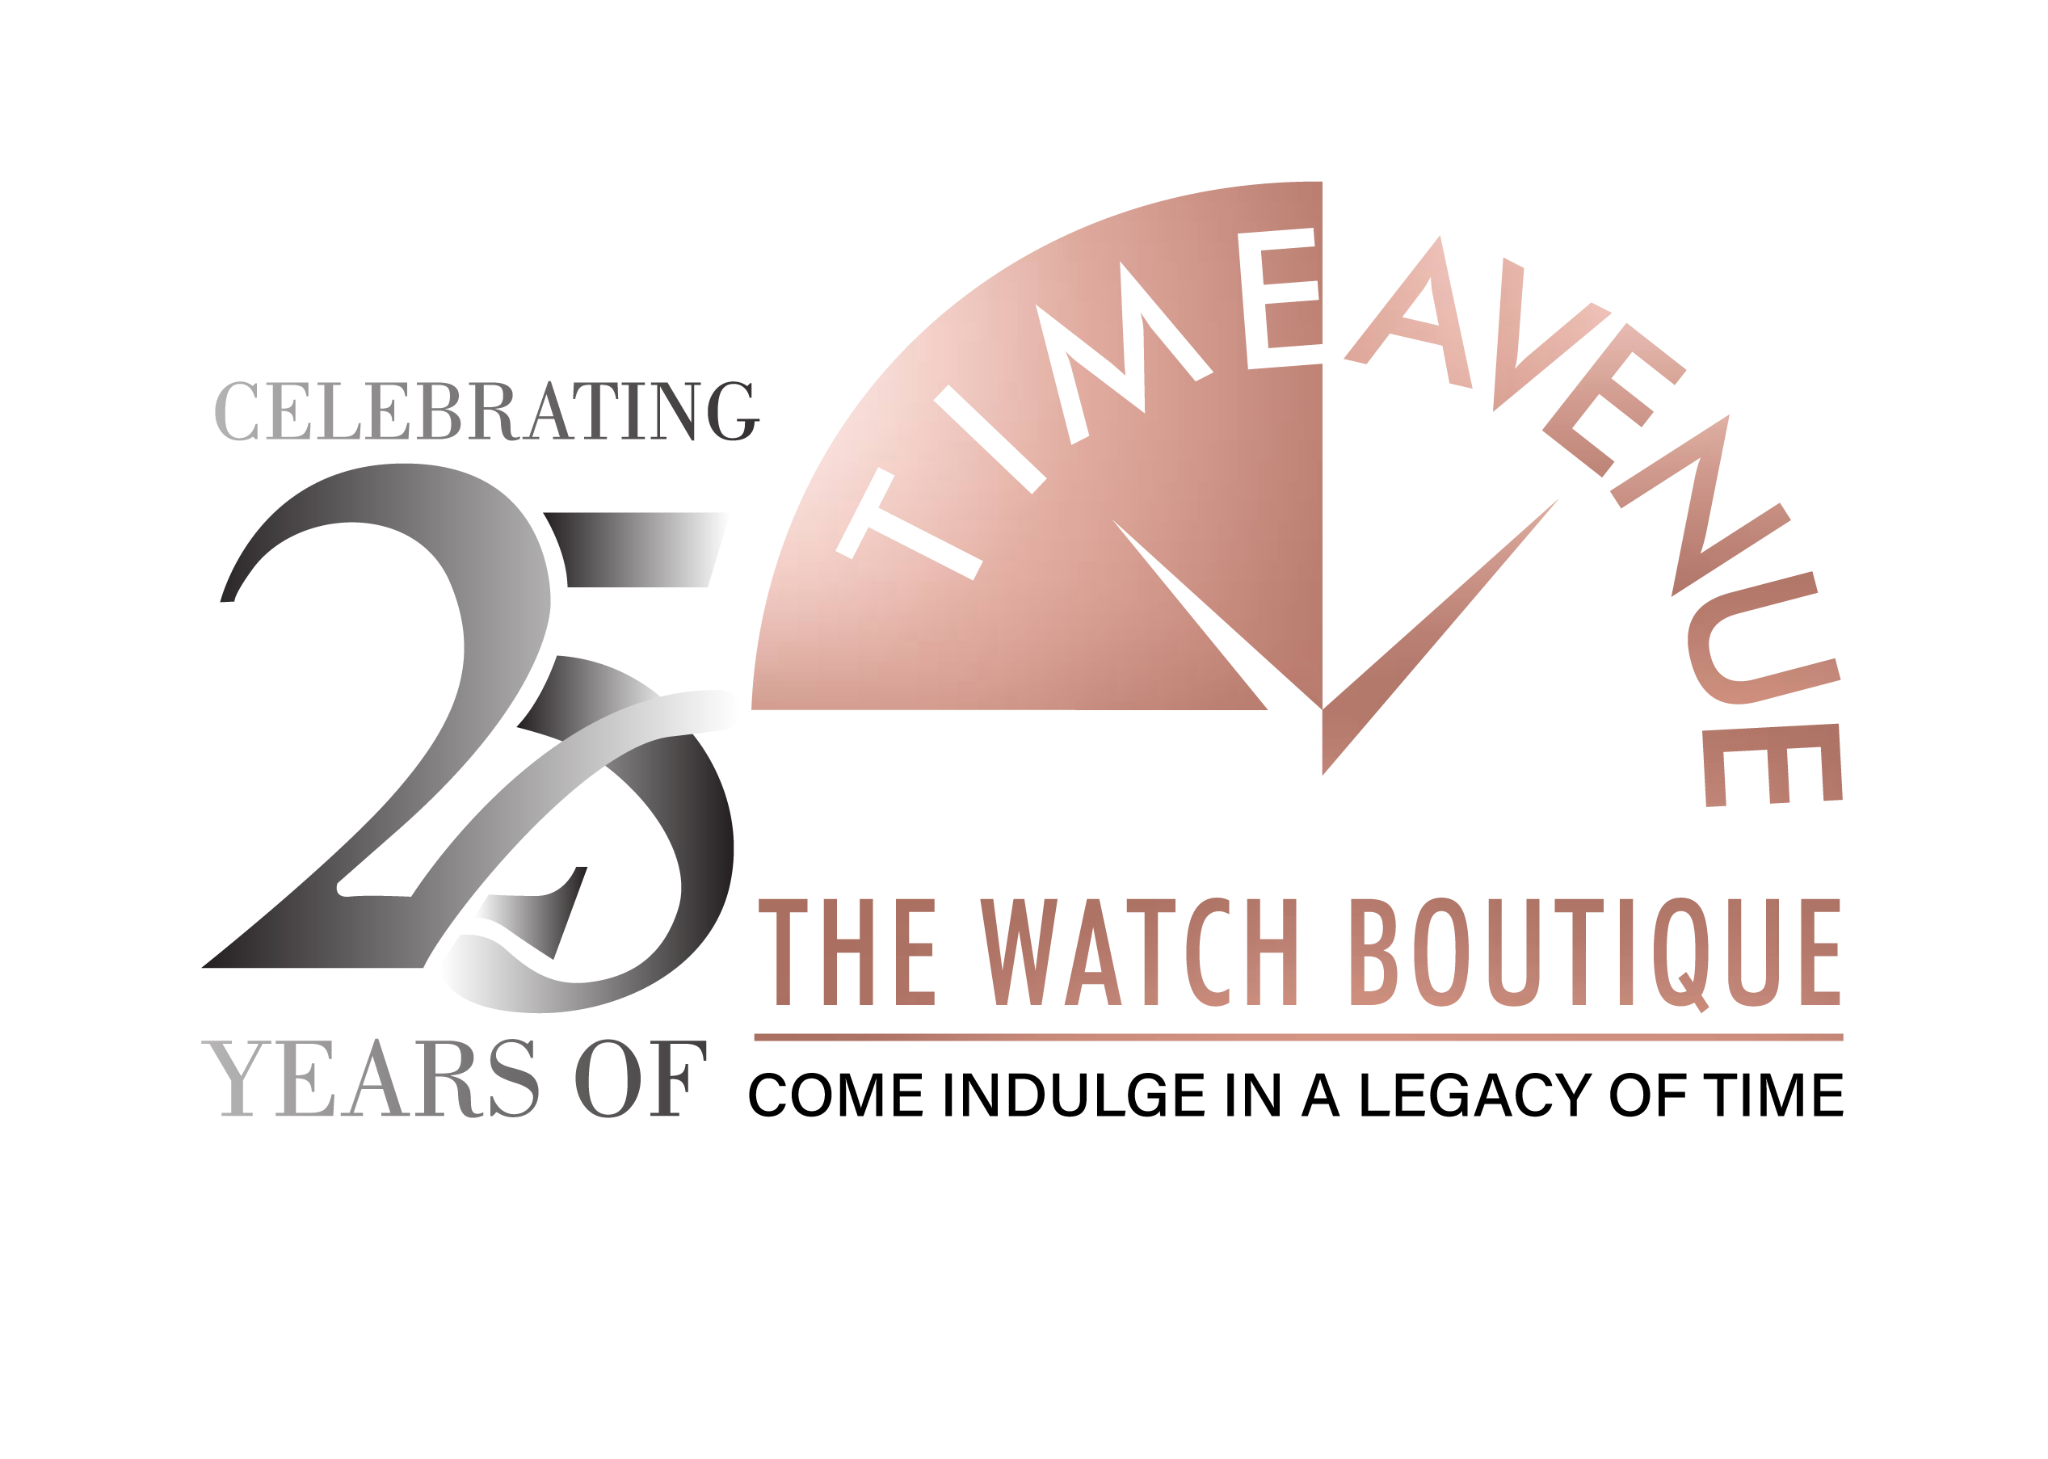 Time Avenue The luxury watch boutique celebrates 25 years-thumnail